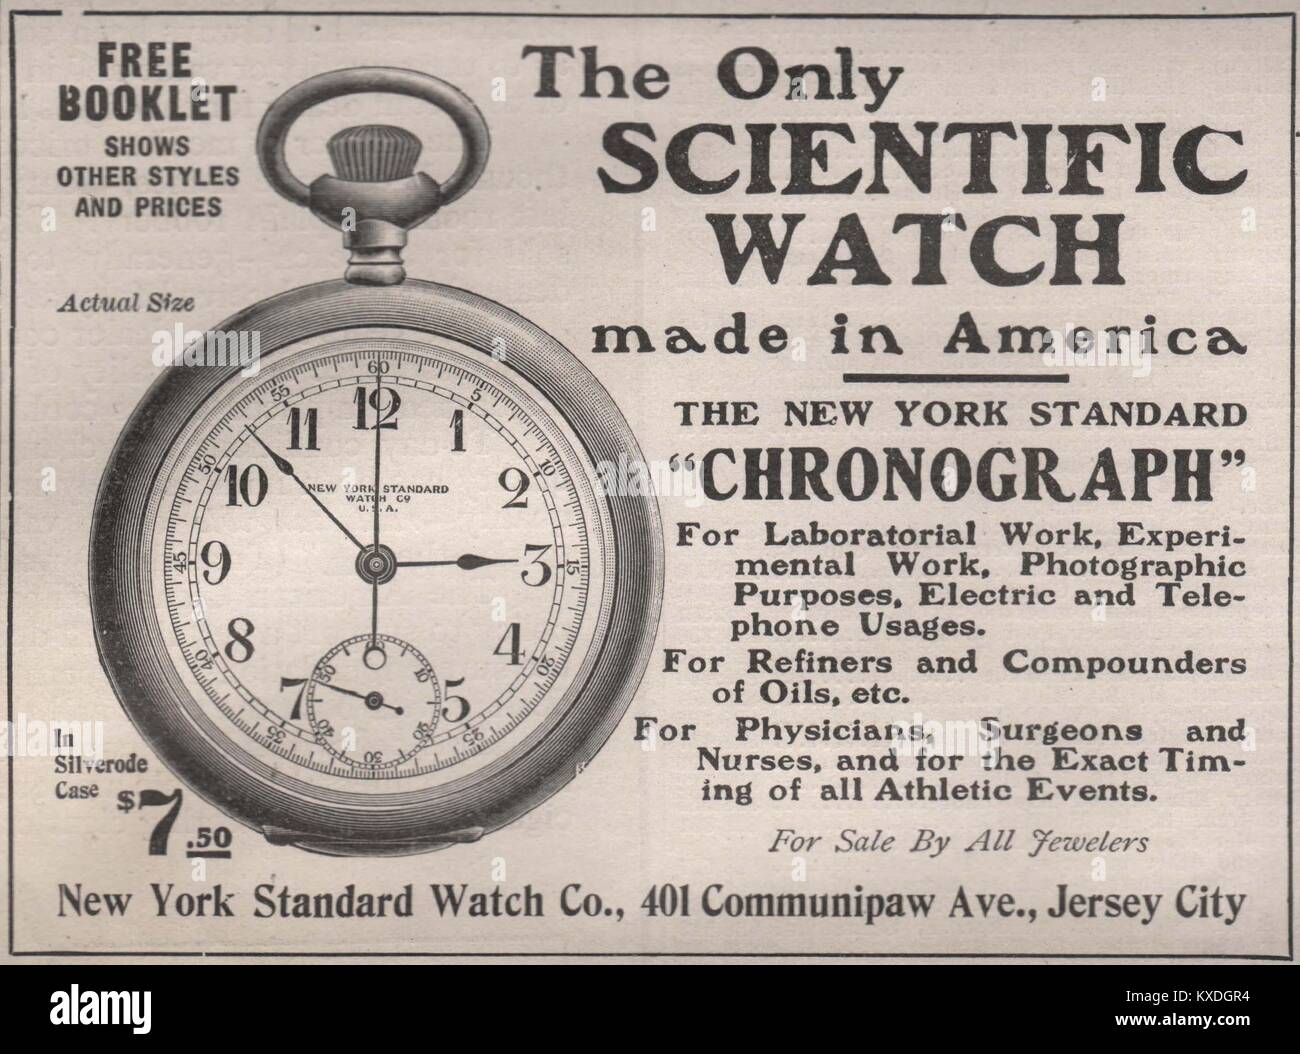 'The only Scientific watch' made in America the New York Standard 'Chronograph' - New York standard watch Co., 401 Communipaw A… Stock Photo